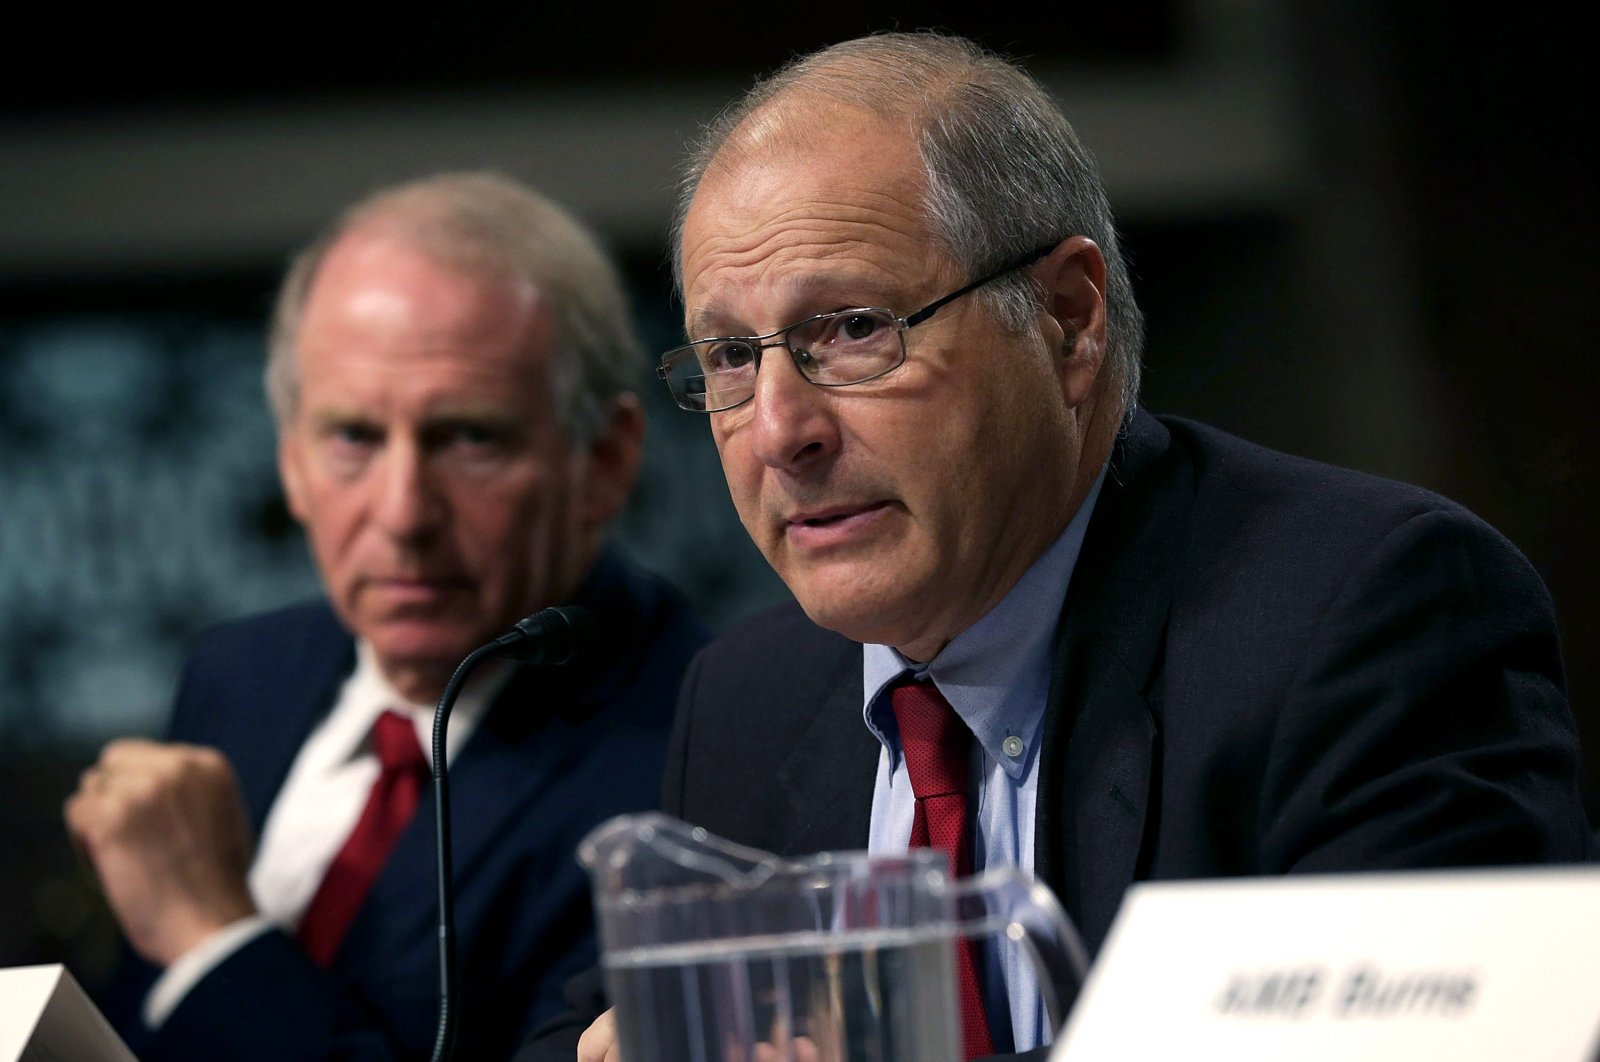 President of the Council on Foreign Relations and former director of policy planning at the State Department Richard Haass (L) and former Defense Undersecretary for Policy Eric Edelman (R) testify during a hearing before Senate Armed Services Committee on Capitol Hill in Washington, D.C., Aug. 4, 2015. (AFP Photo)